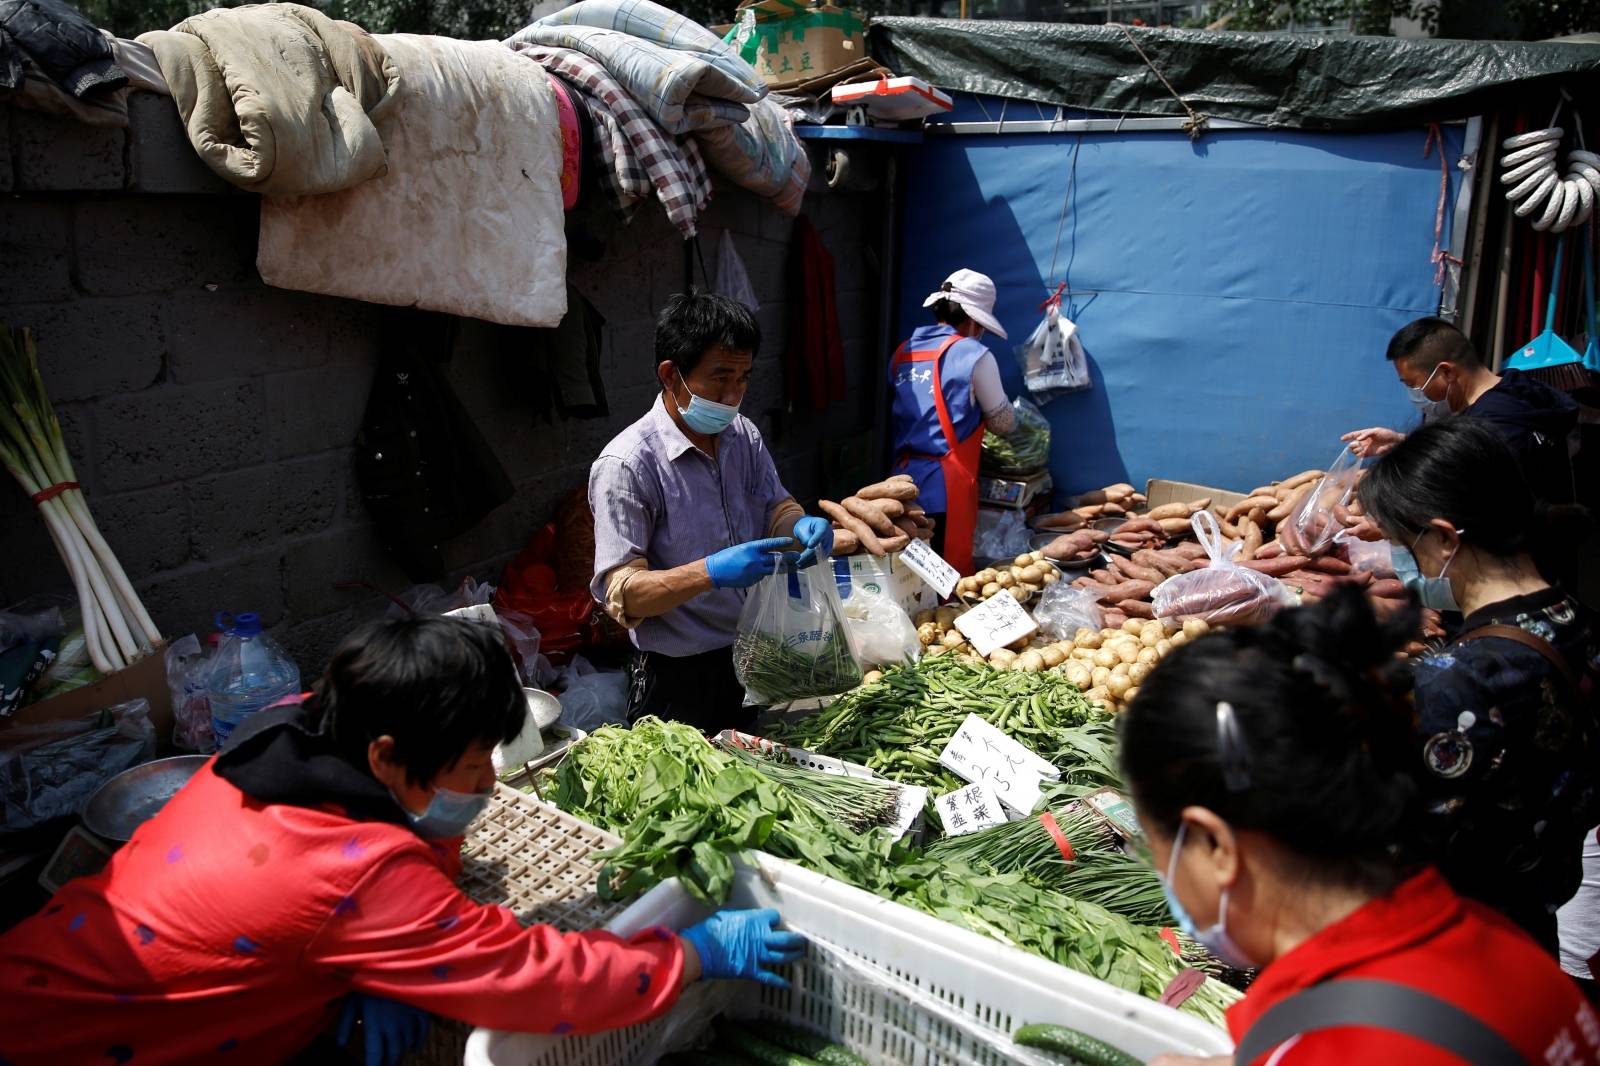 A vegetable stall vendor wearing a face mask attends to customers at an outdoor market in Beijing, following the novel coronavirus disease (COVID-19) outbreak